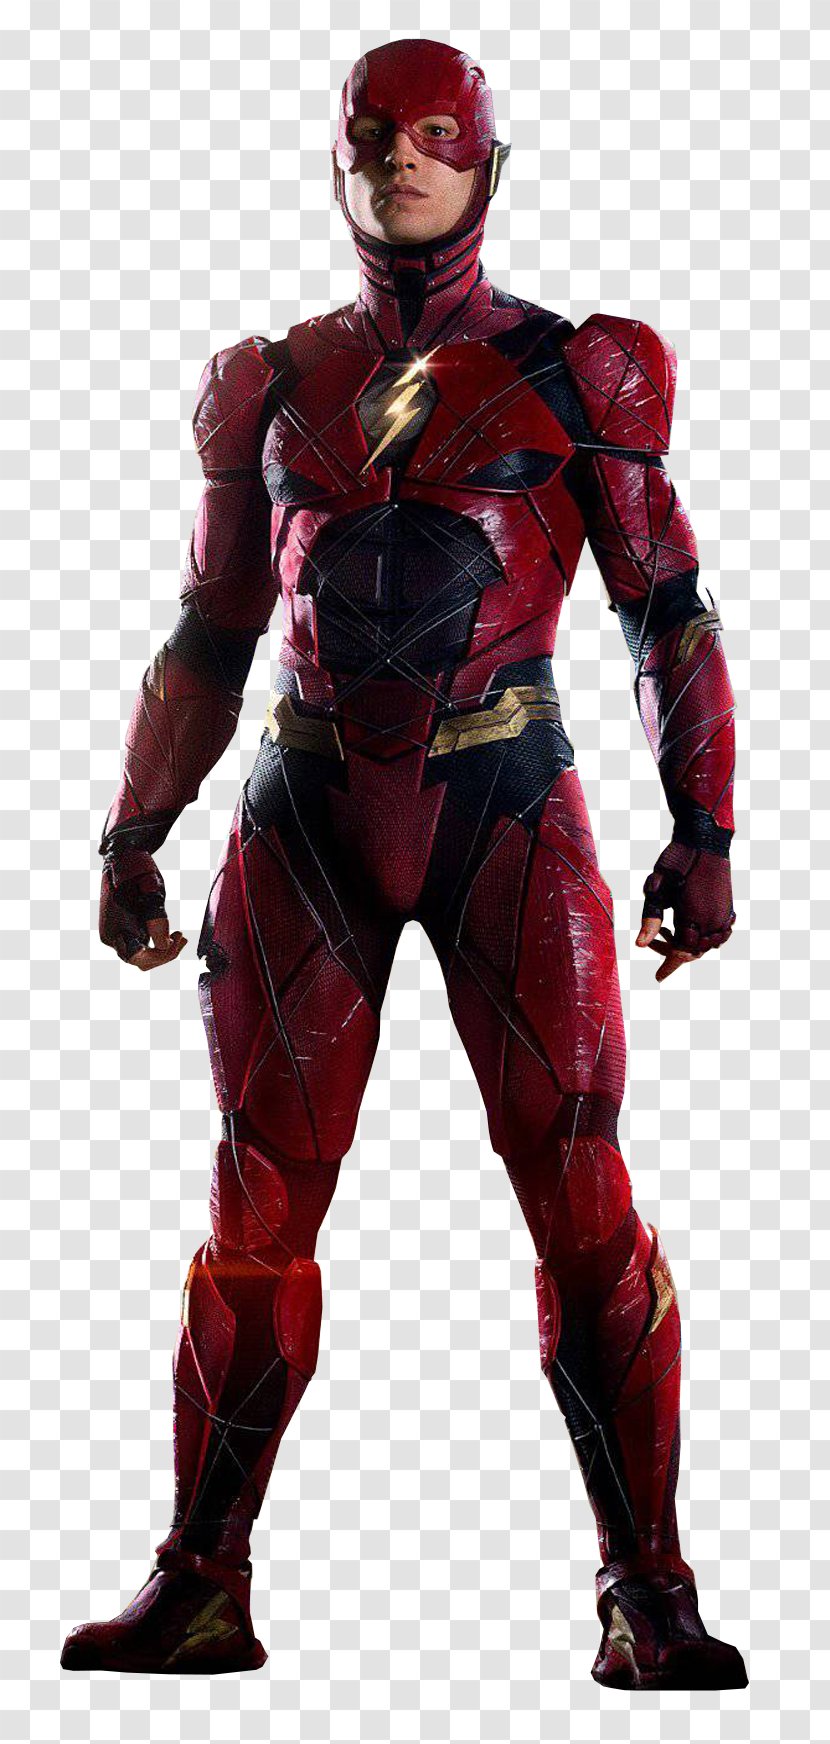 Justice League Heroes: The Flash Cyborg - Costume Transparent PNG